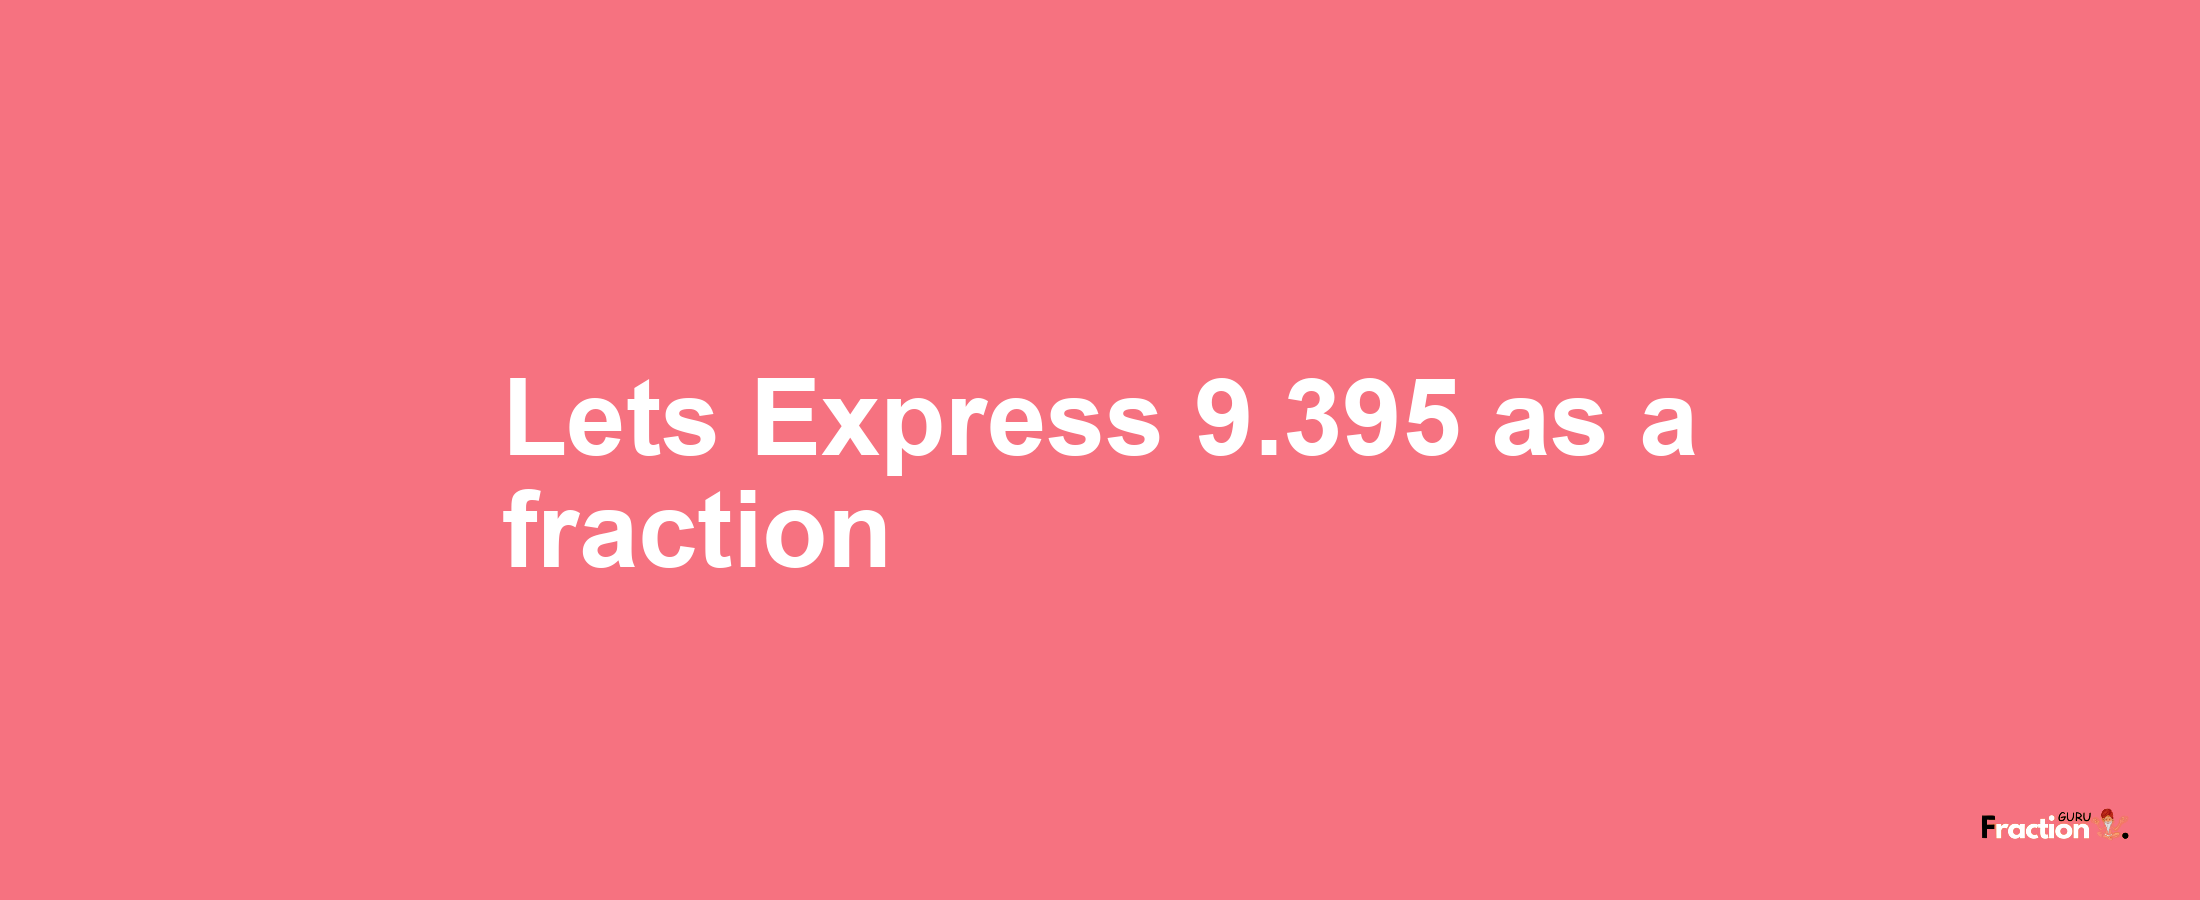 Lets Express 9.395 as afraction